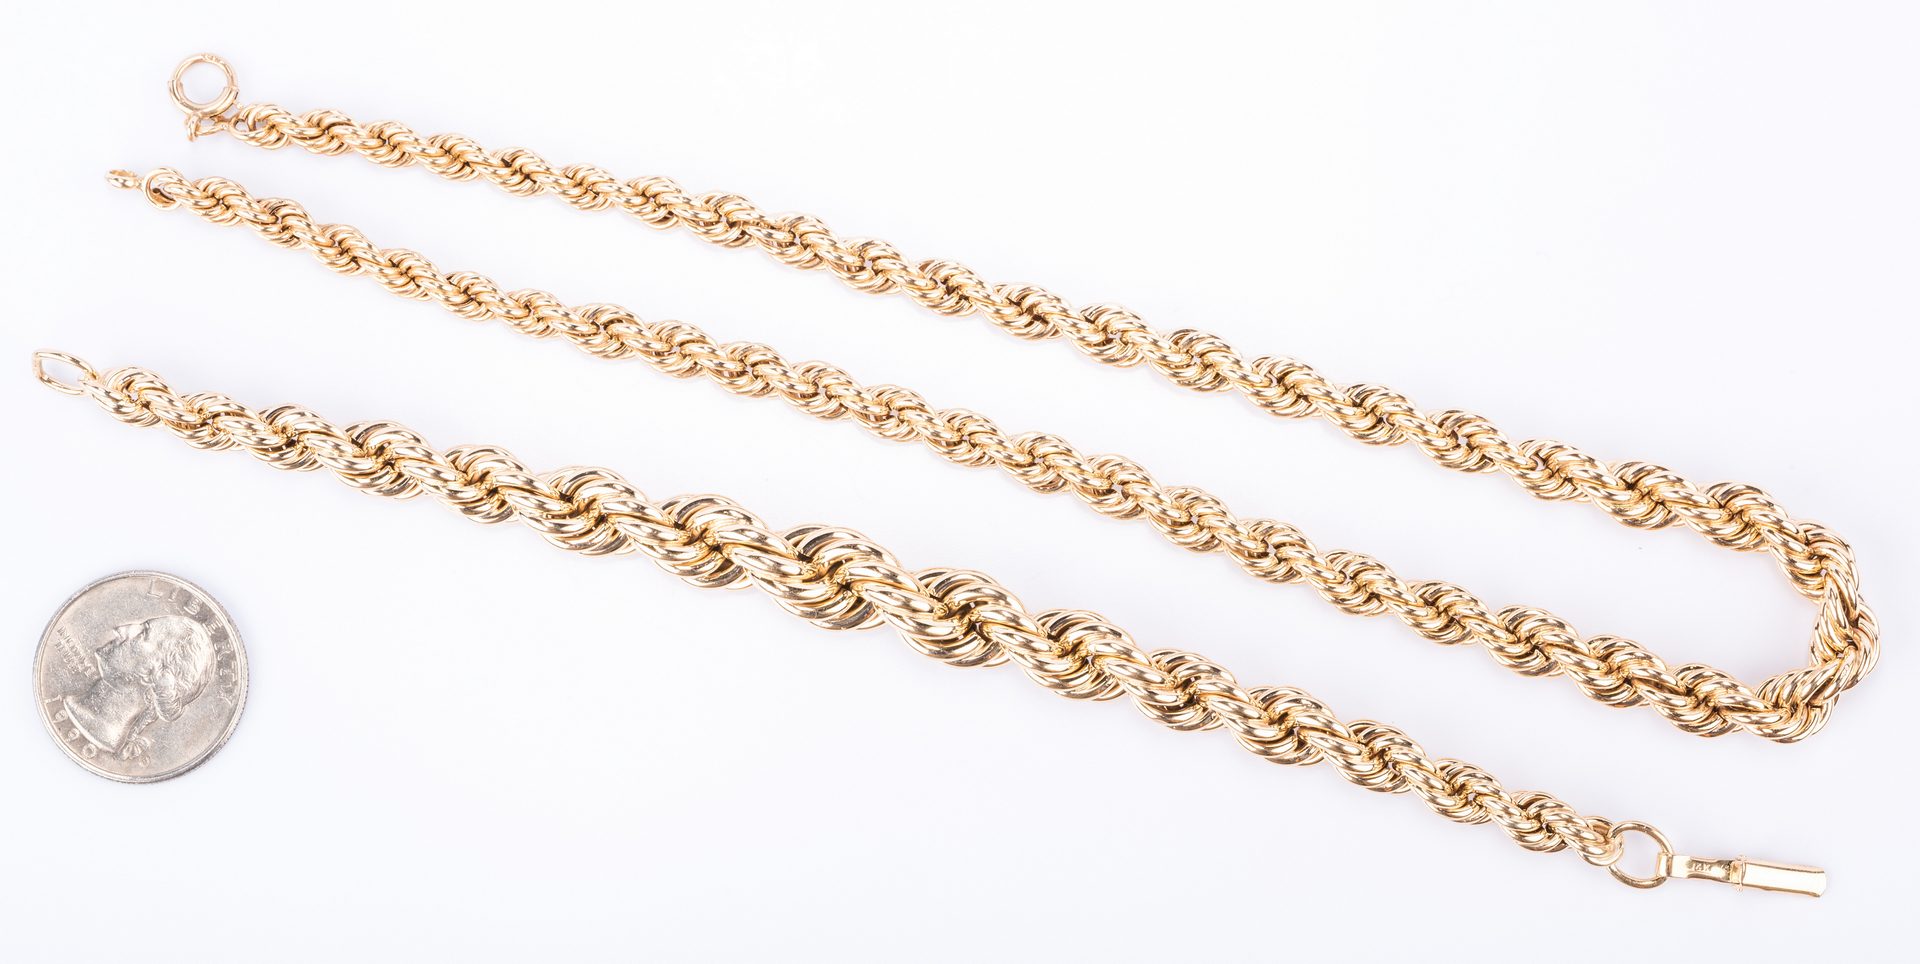 Lot 374: 14K Rope Chain and Bracelet. 38.6 grams, 2 items